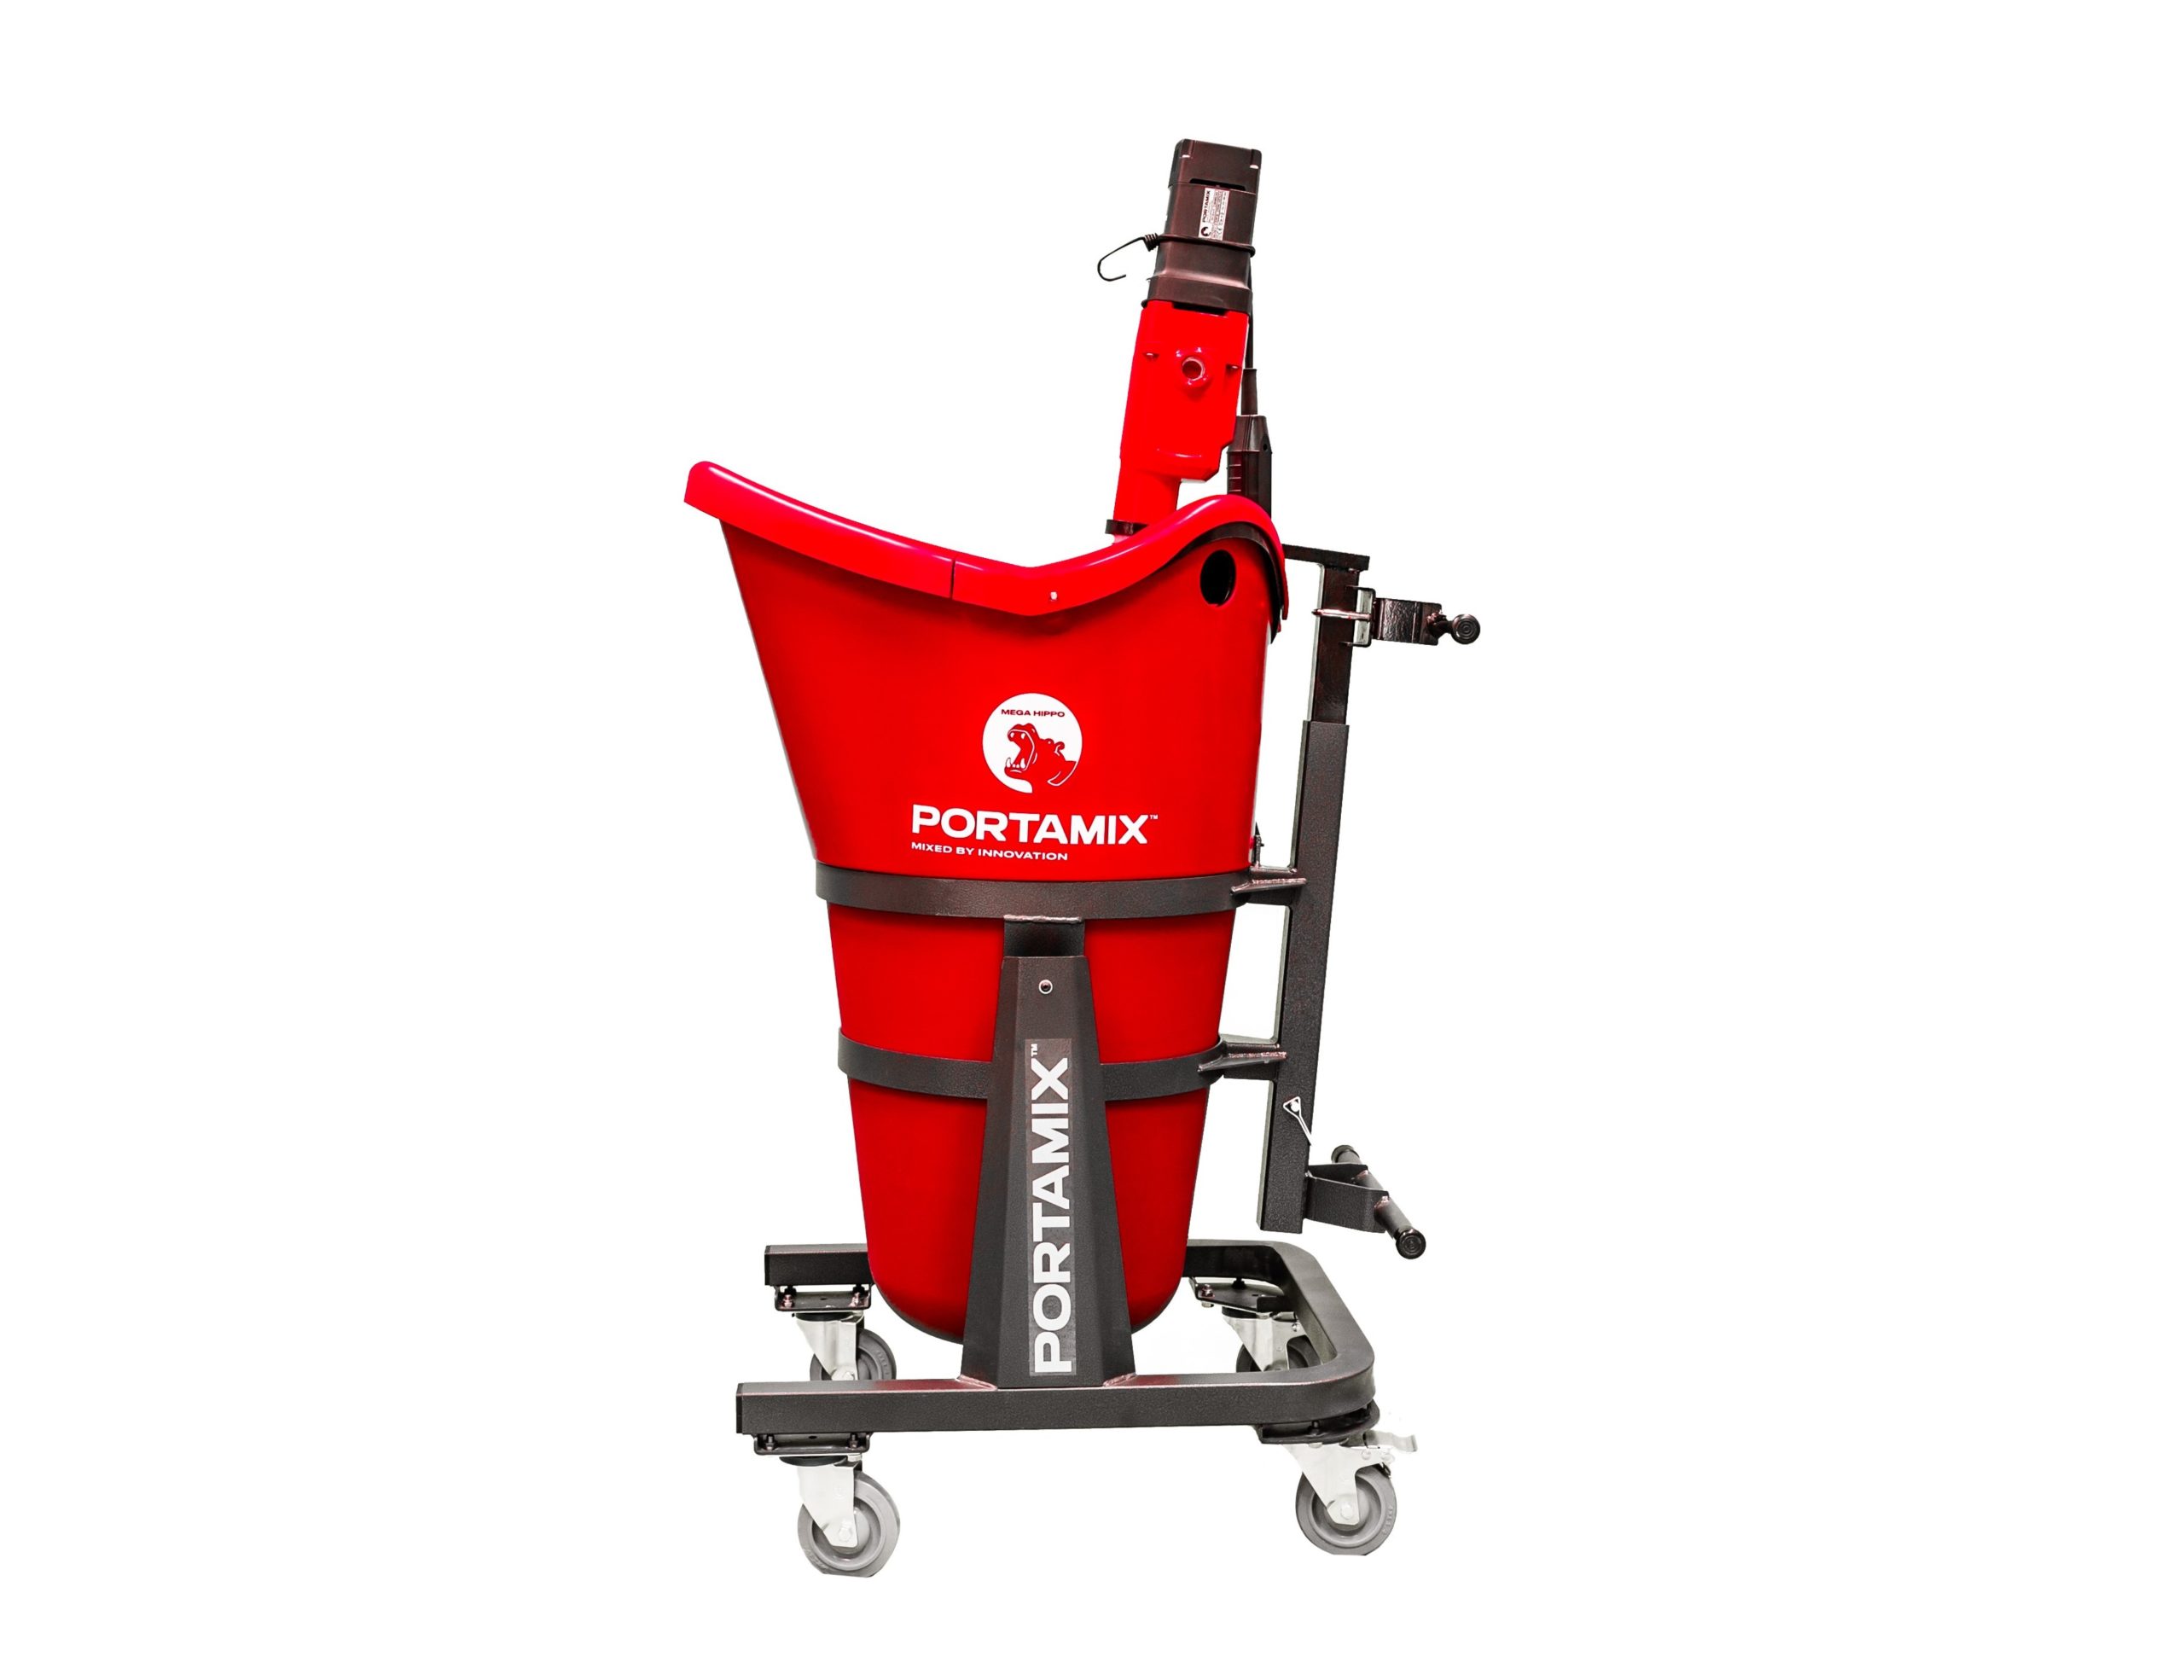 The image showcases the Gen II variation of the Portamix Mega Hippo mixer machine, set against a clear white background. This robust machine is predominantly red with black accents, featuring a spacious bucket mounted on sturdy wheels and equipped with a black handle for easy maneuverability. The bucket prominently displays the "Portamix" branding, emphasizing its origin. Additionally, a smaller "Mega Hippo" logo is visible in the lower center, presented as a red and black emblem. The machine's design indicates its capability to handle flooring applications efficiently, powered by its 3-speed 20amp motor, making it suitable for mixing 5-6 bags of material.